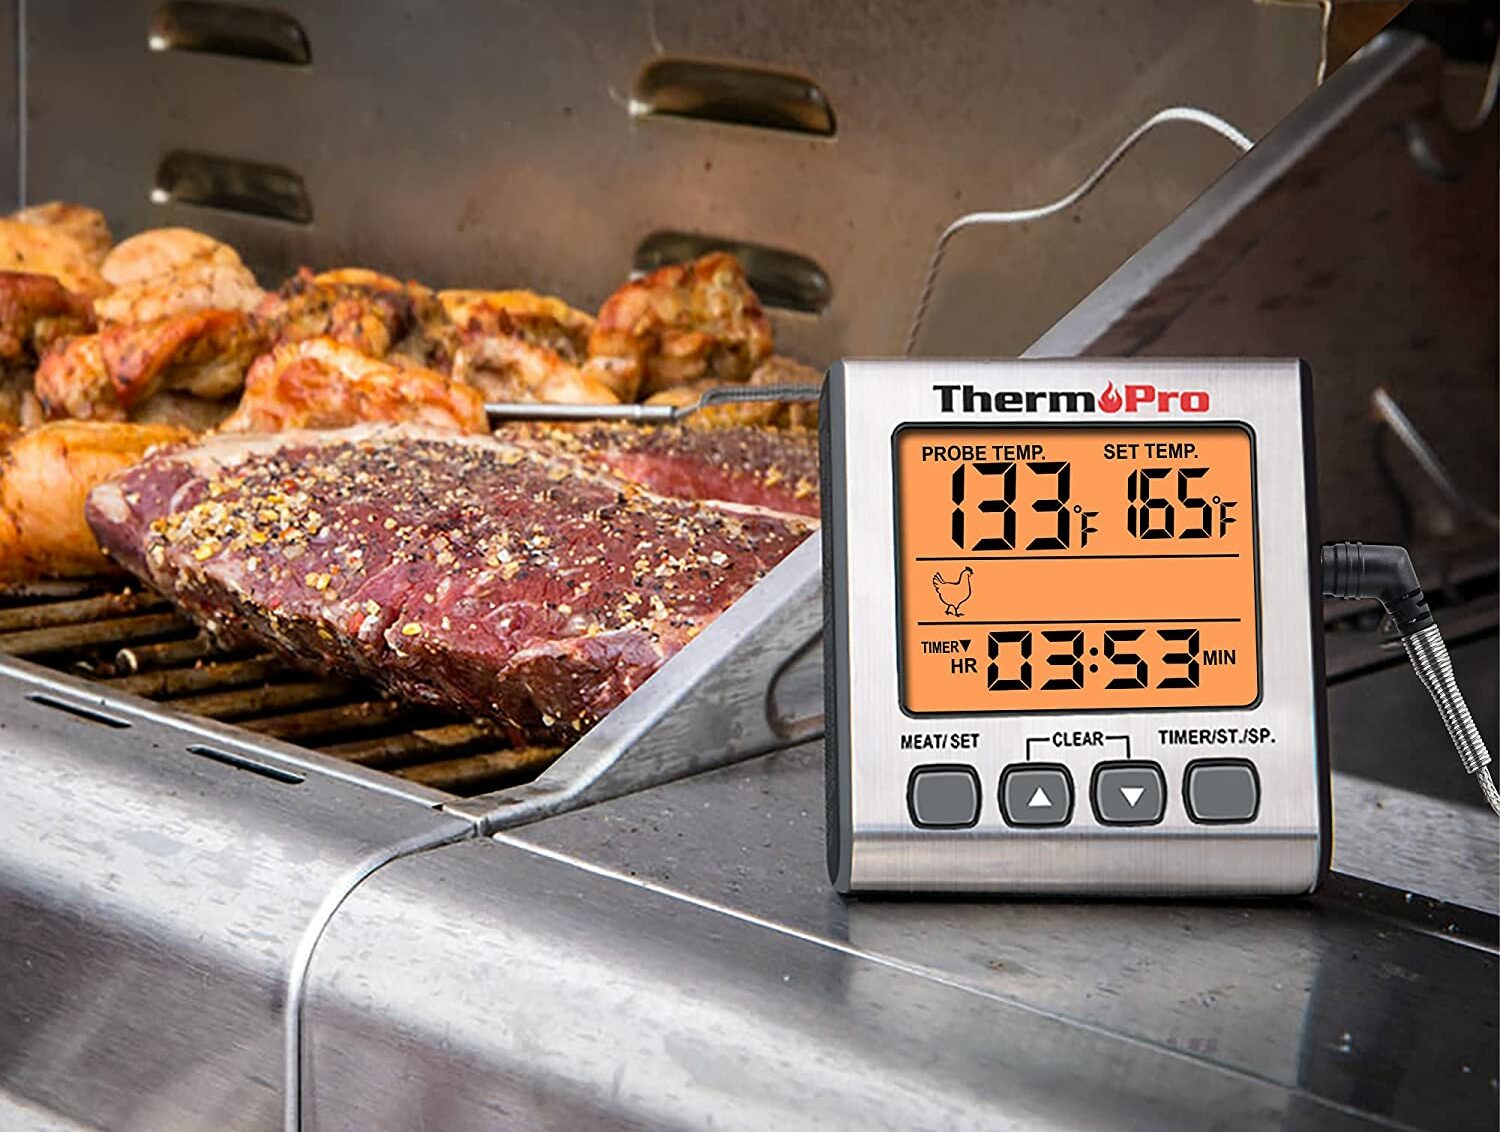 meat and chicken on grill with digital thermometer in focus